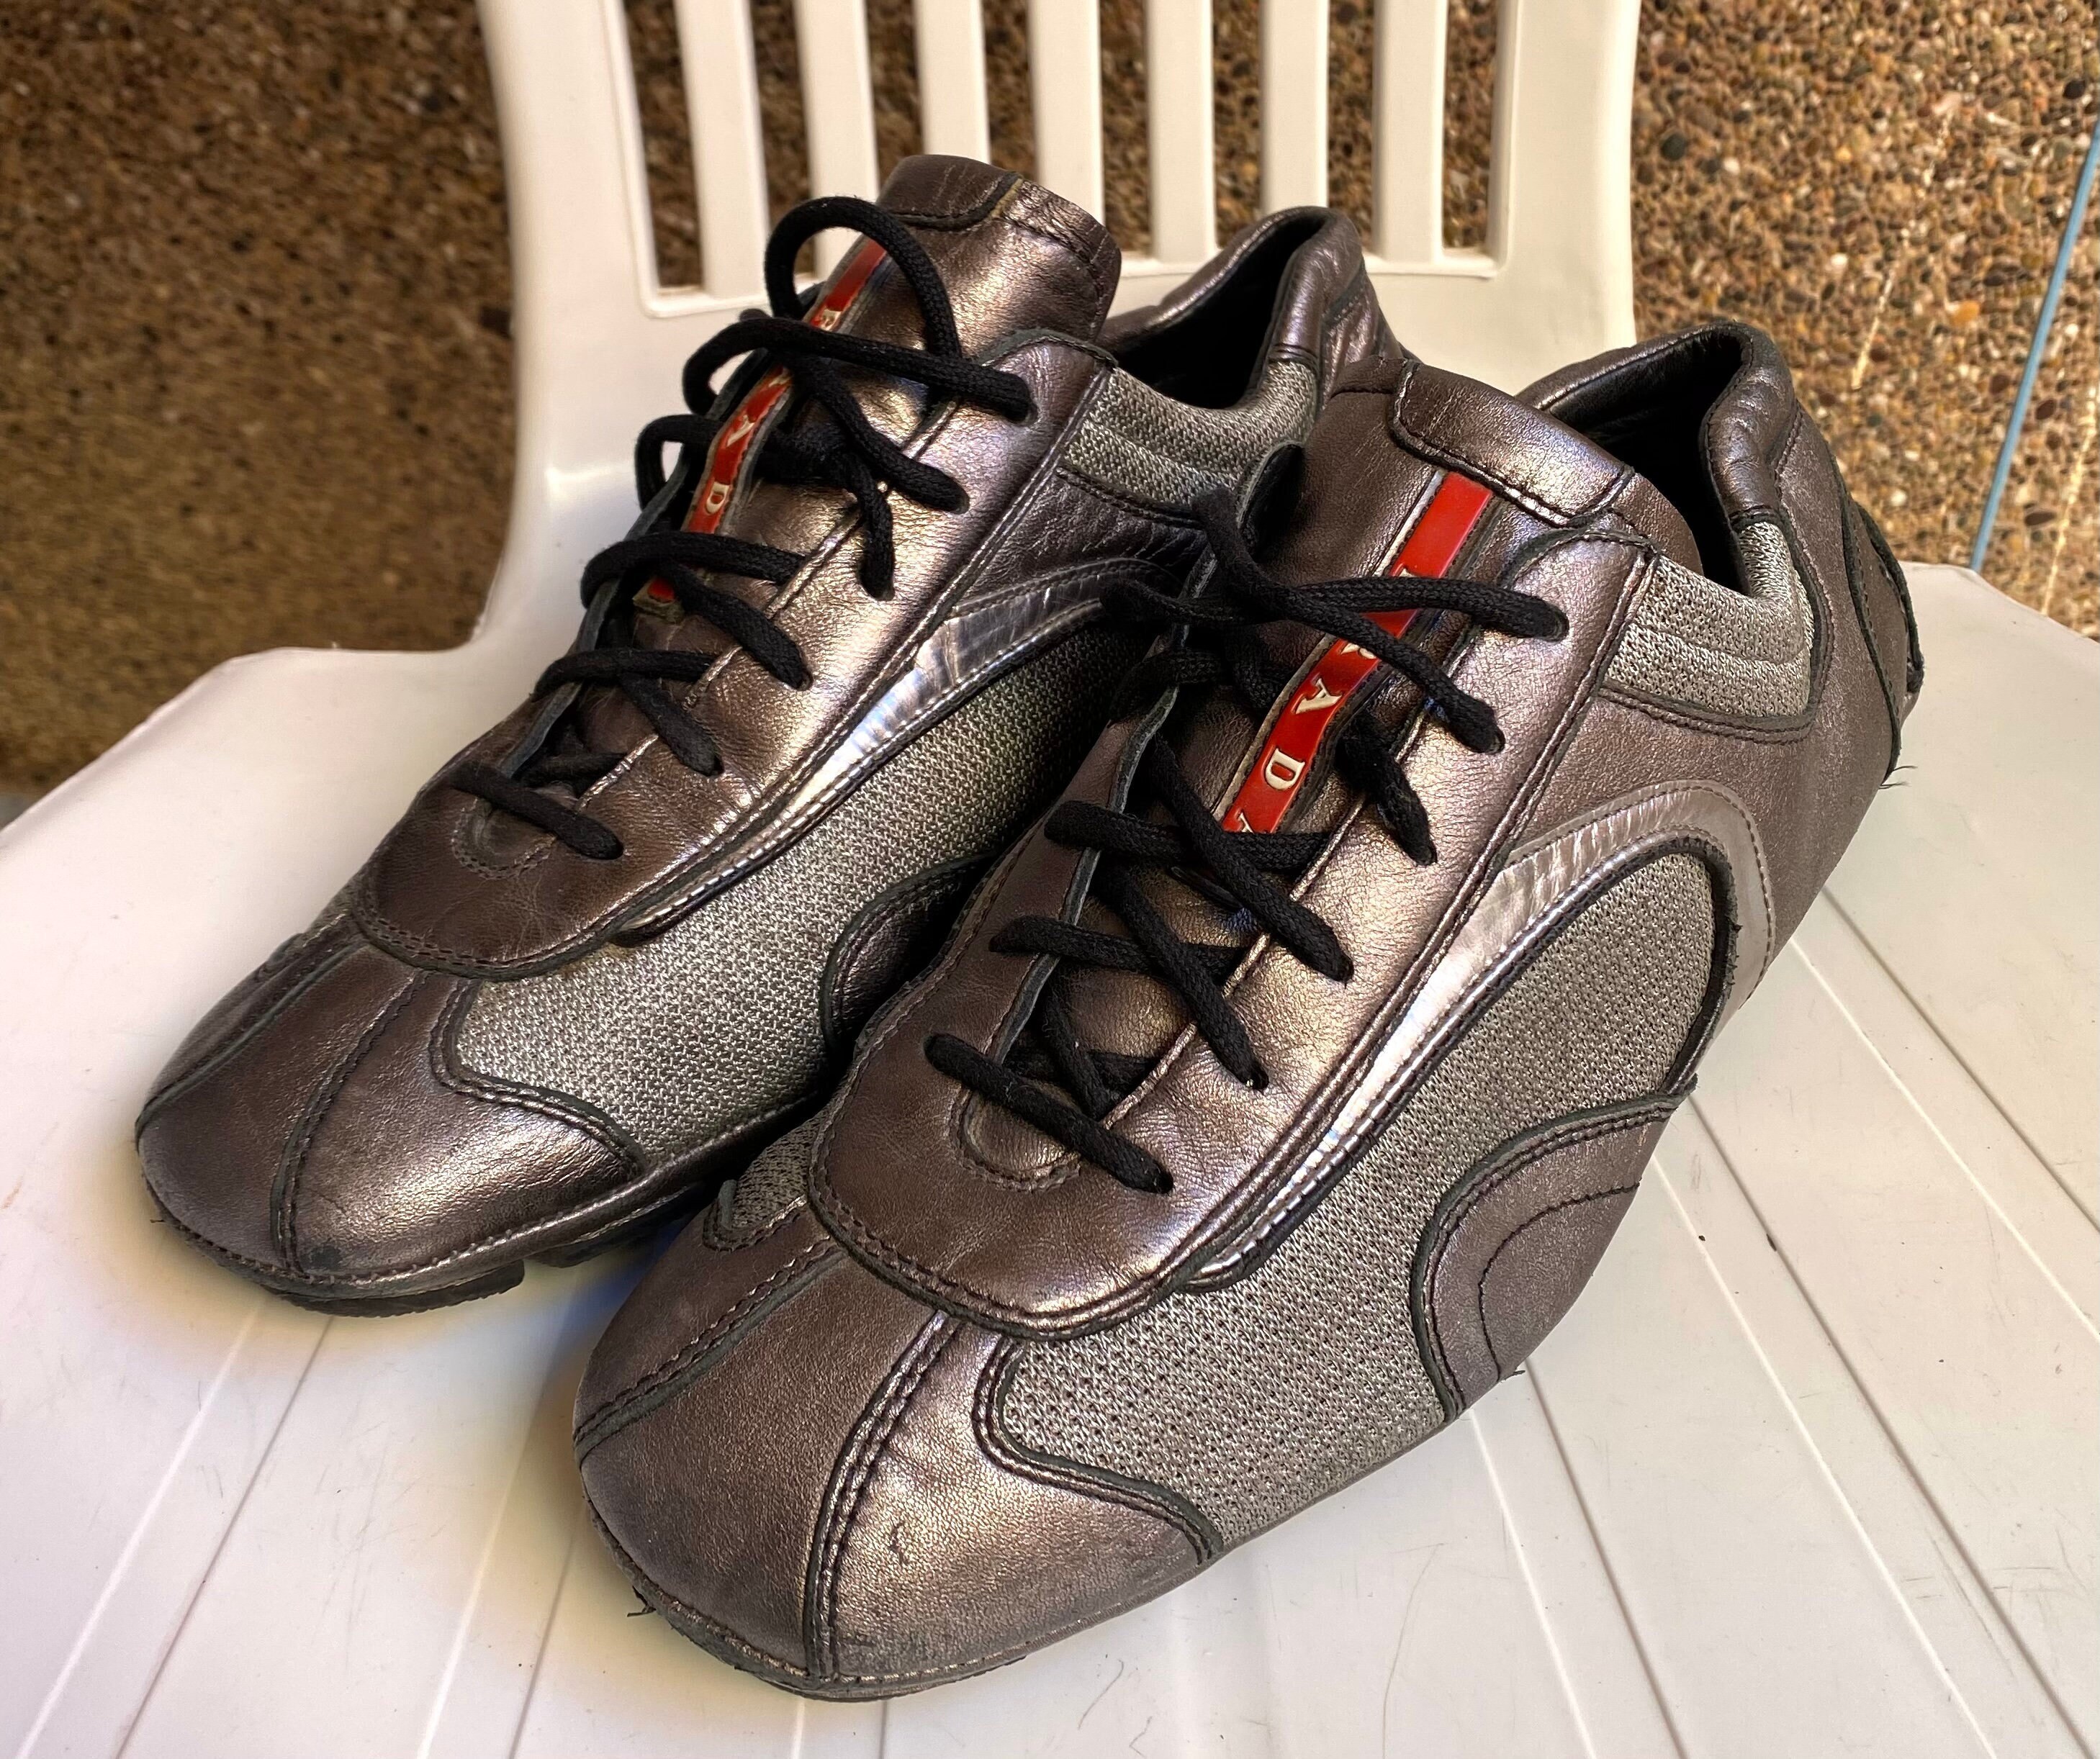 Prada Mens Adult Shoes Gray 4E1165 Size 65 / 39/40 Sneakers - Etsy